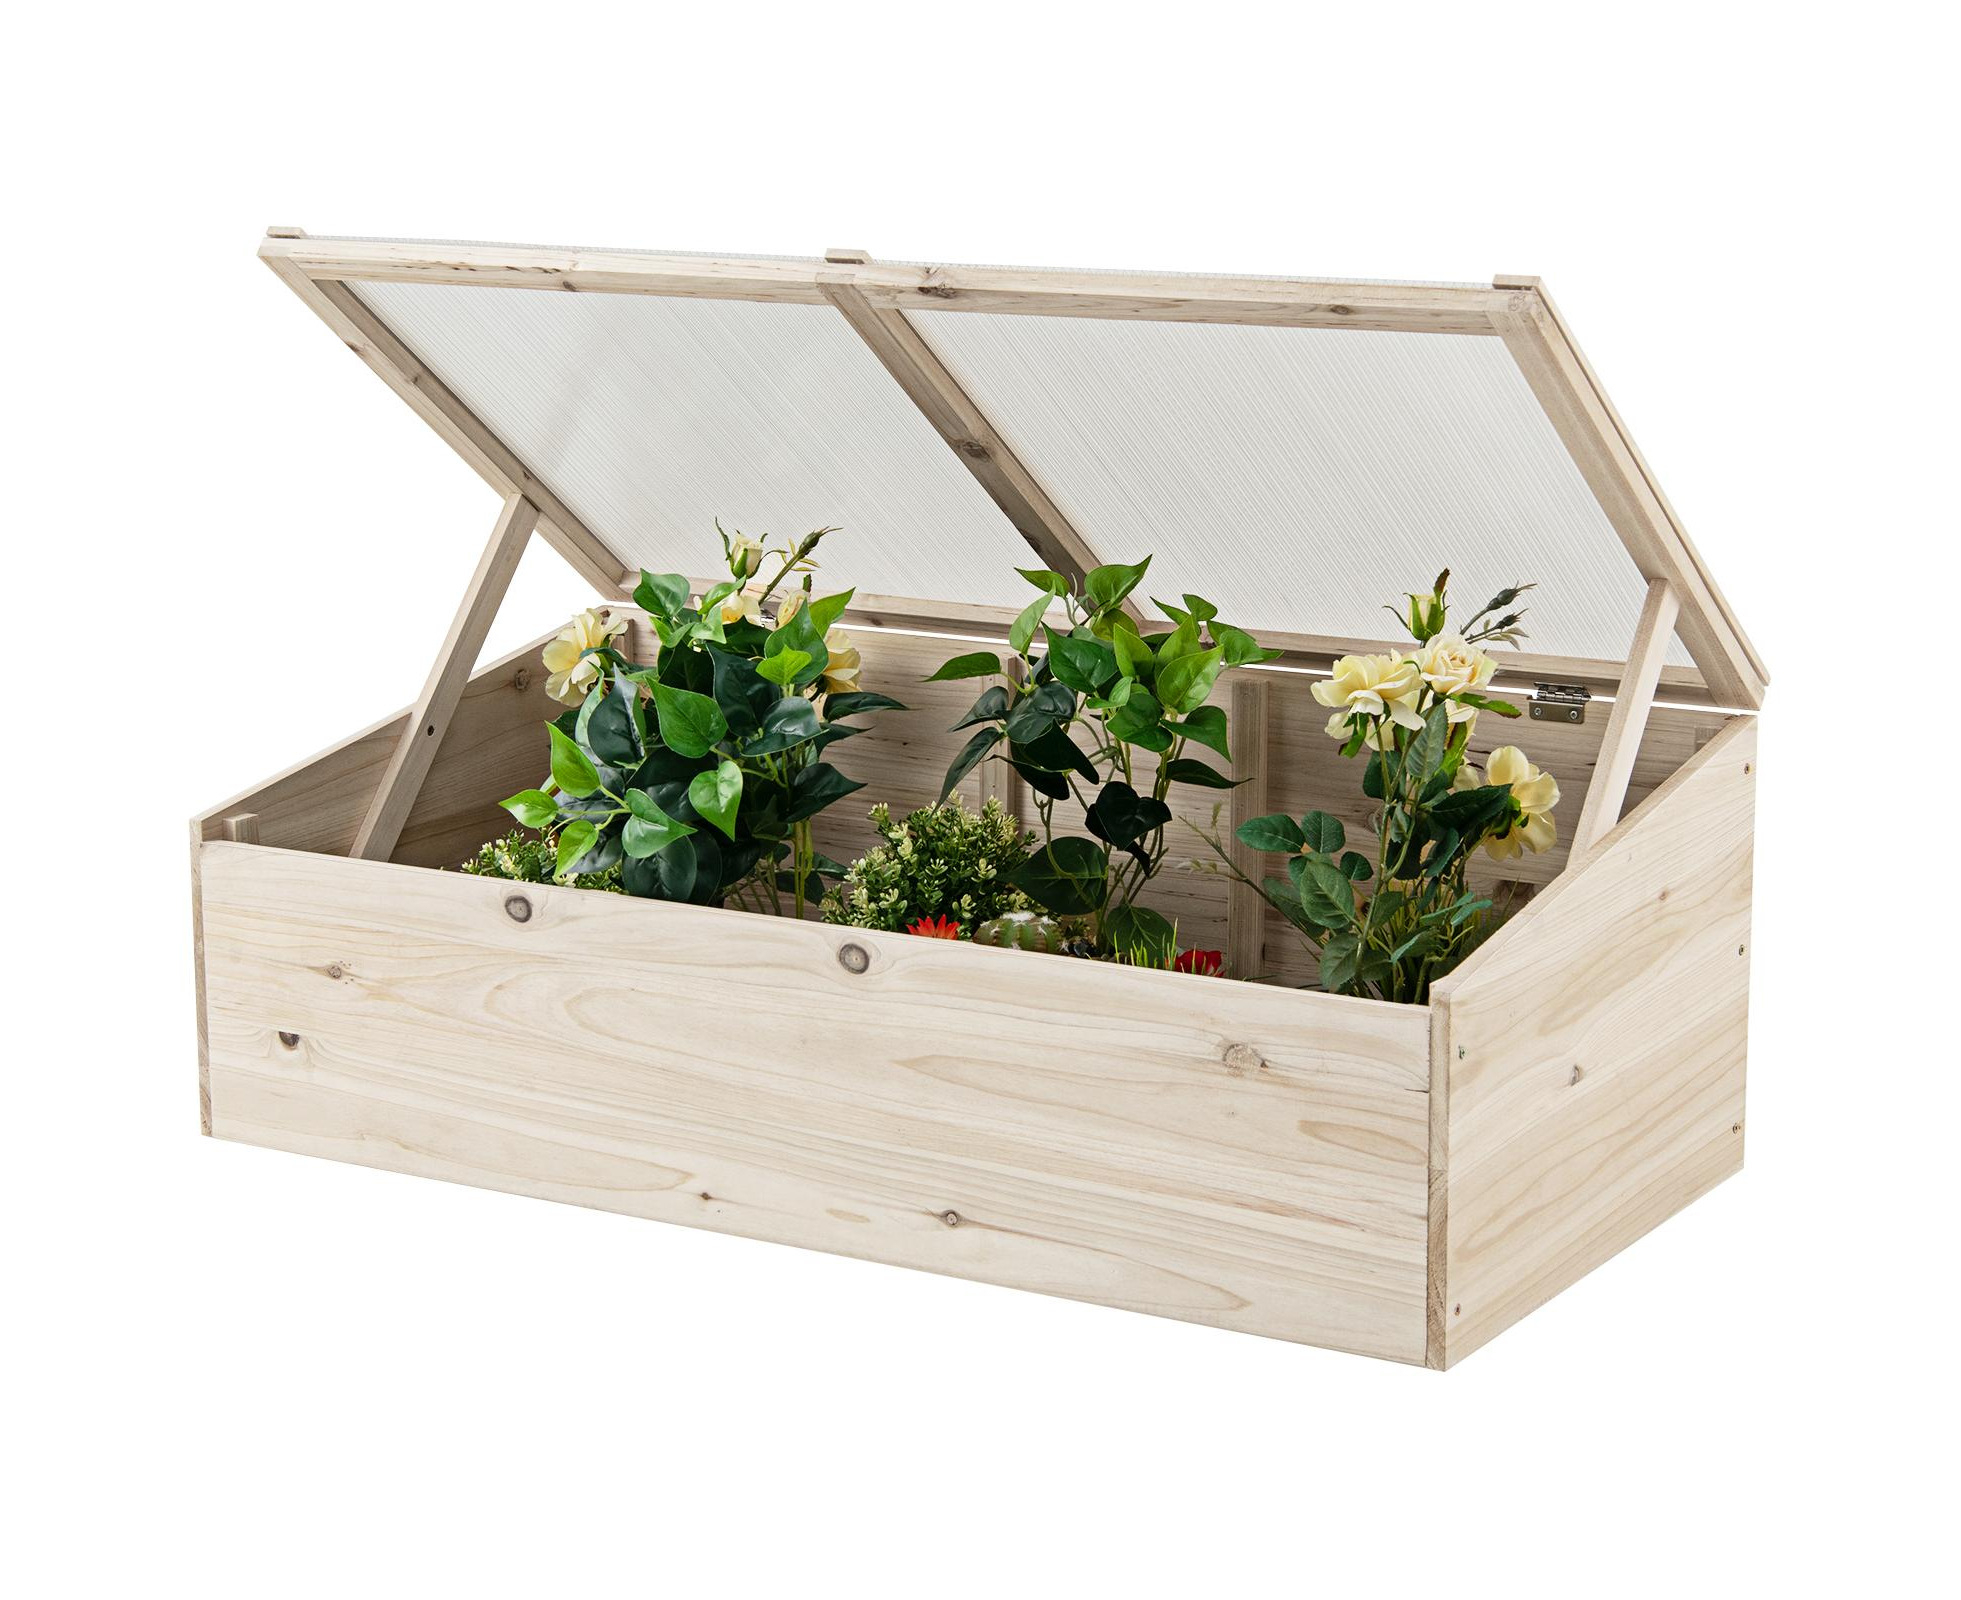 w/　Top　Planter　Raised　Wood　Box　PVC　Garden　Mini　Outdoor　Portable　Greenhouse　Vegetable　Flower　Costway　Cover